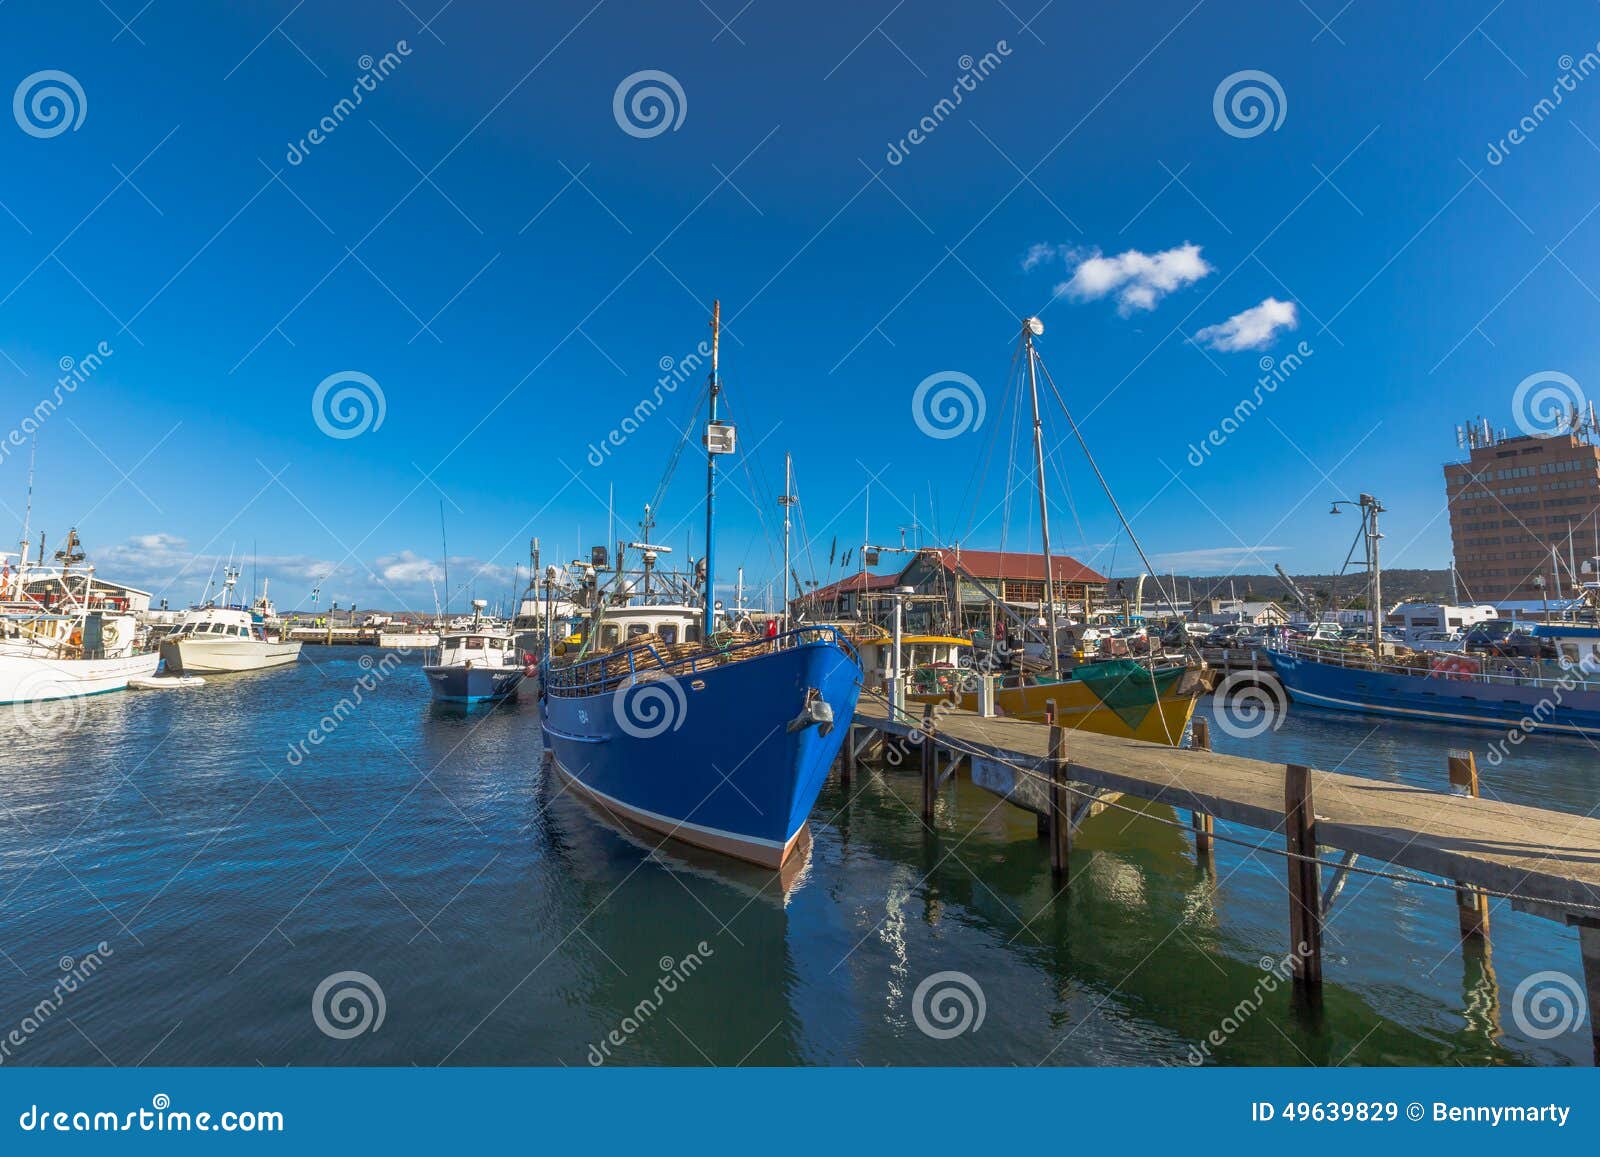 Hobart Harbour Editorial Stock Image - Image: 49639829